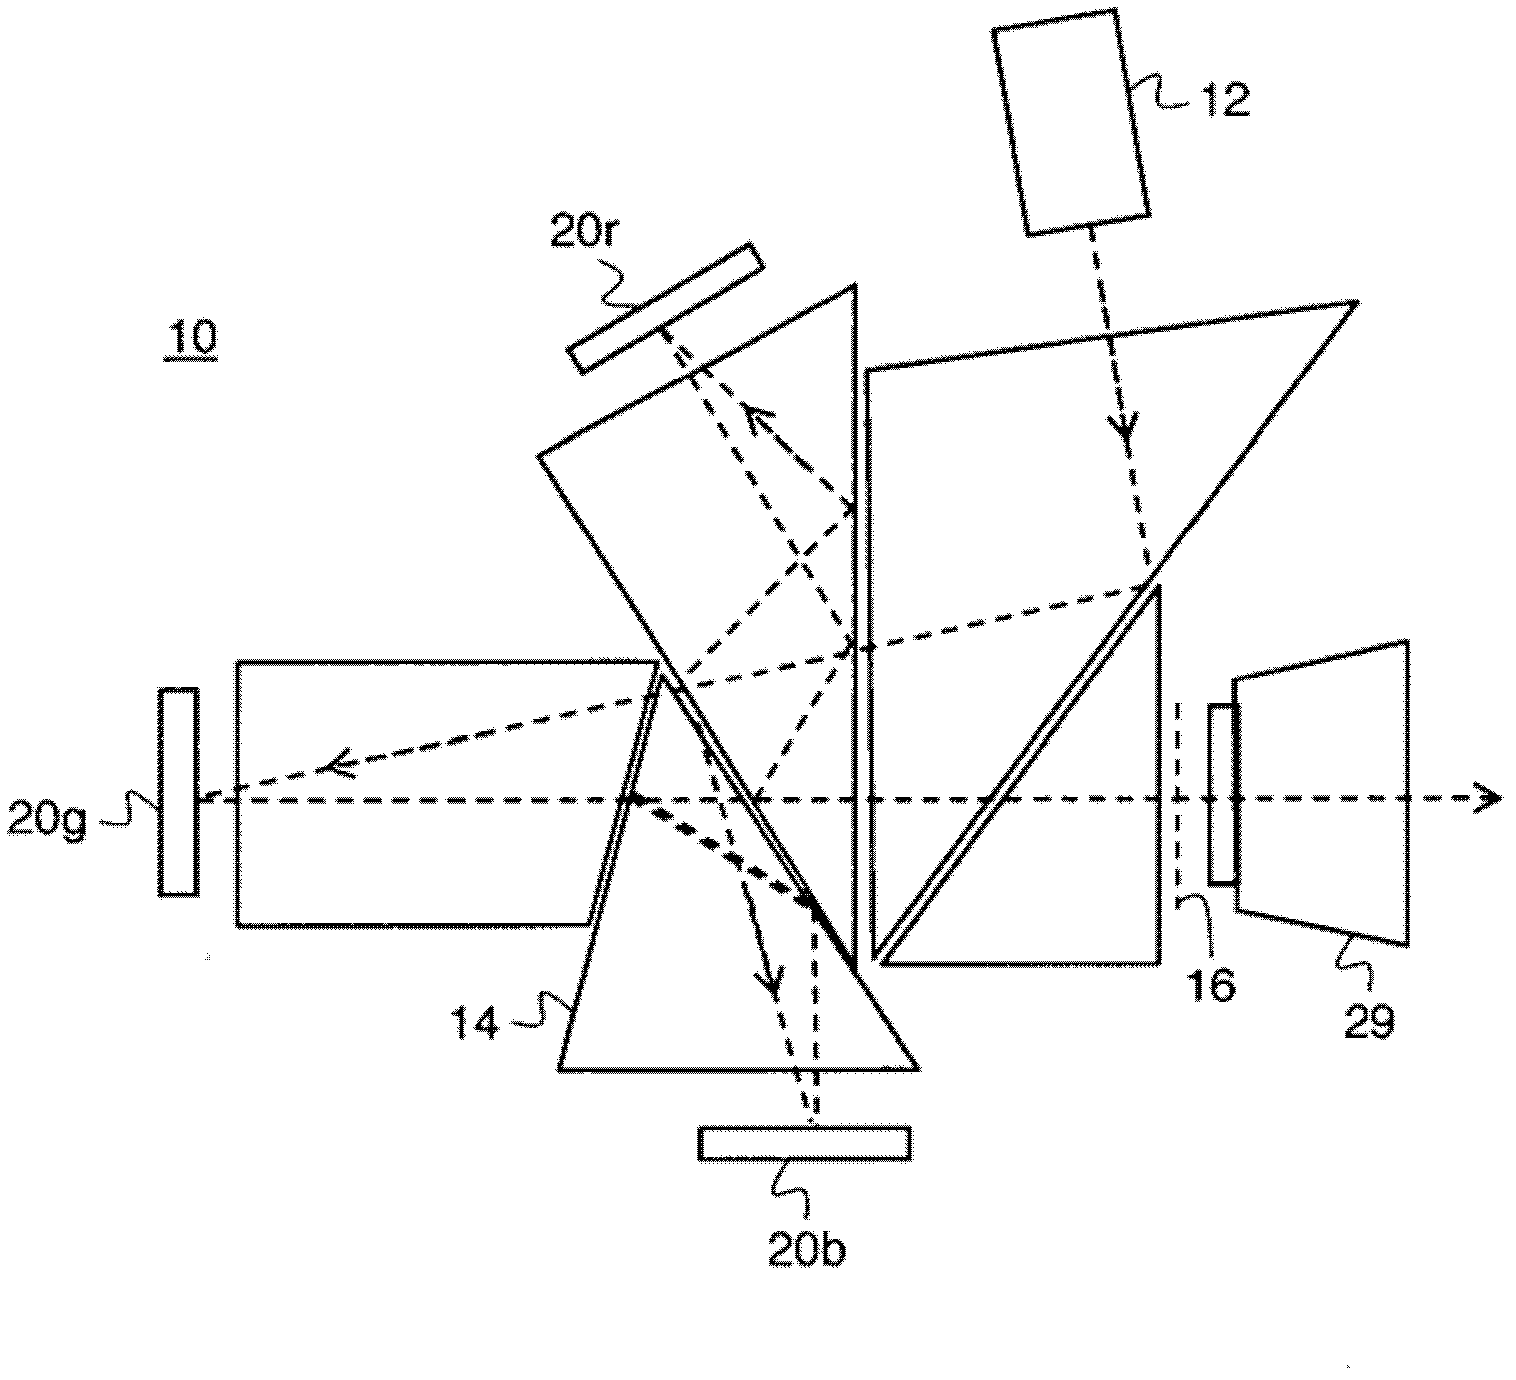 Etendue reduced stereo projection using segmented disk